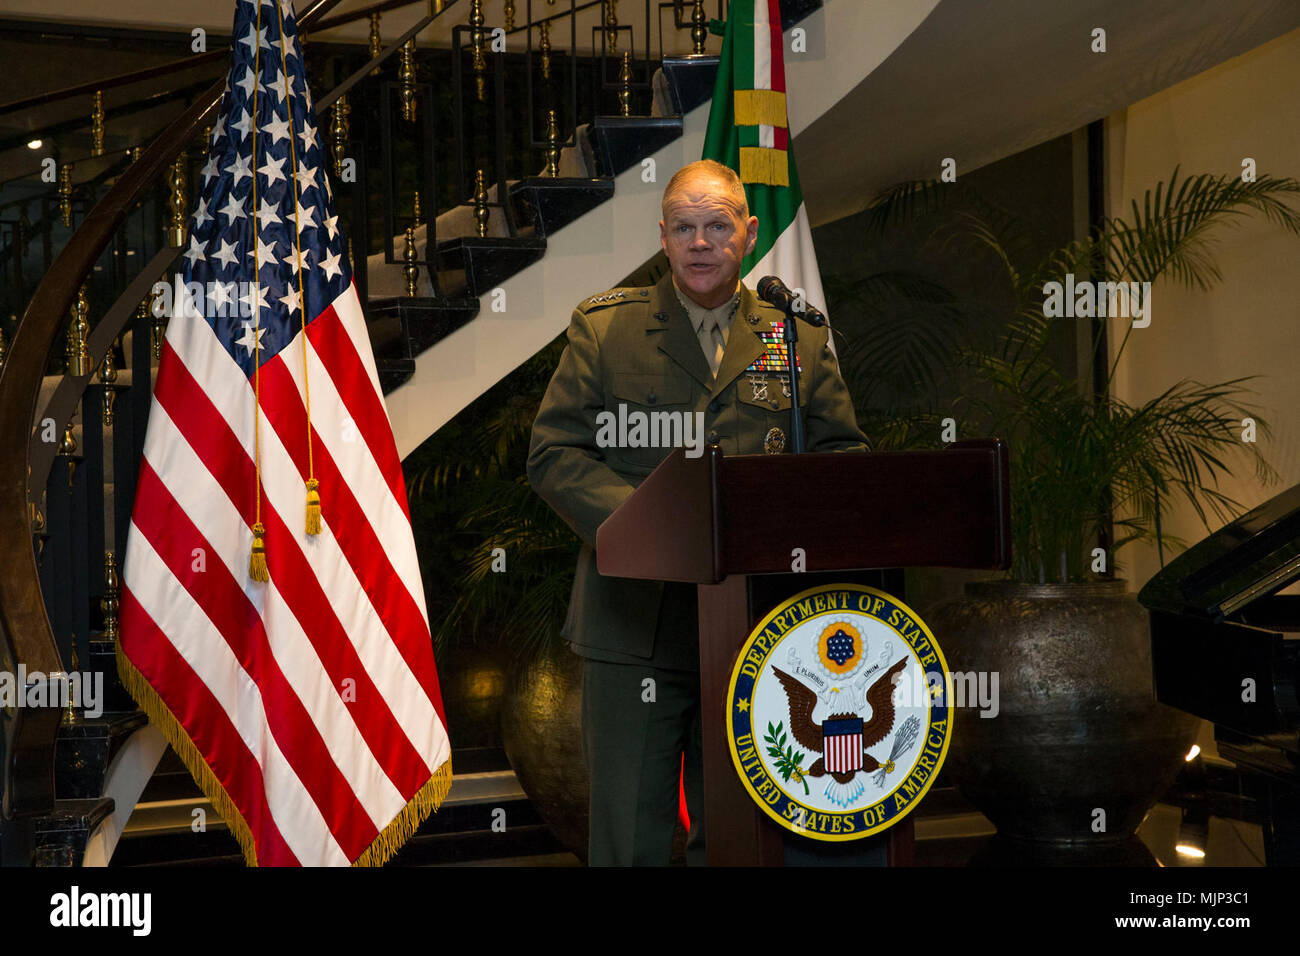 U.S. Marine Gen. Robert B. Neller Commandant of the Marine Corps speaks to military leaders from several partner nations during a dinner at the residence of U.S. Ambassador Roberta S. Jacobson in Mexico City, Mexico on March 13, 2018. MLAC was held from March 11 through the 16th and incorporated numerous Marine leaders throughout Latin America. Armed Forces and civilians displaying courage bravery dedication commitment and sacrifice Stock Photo